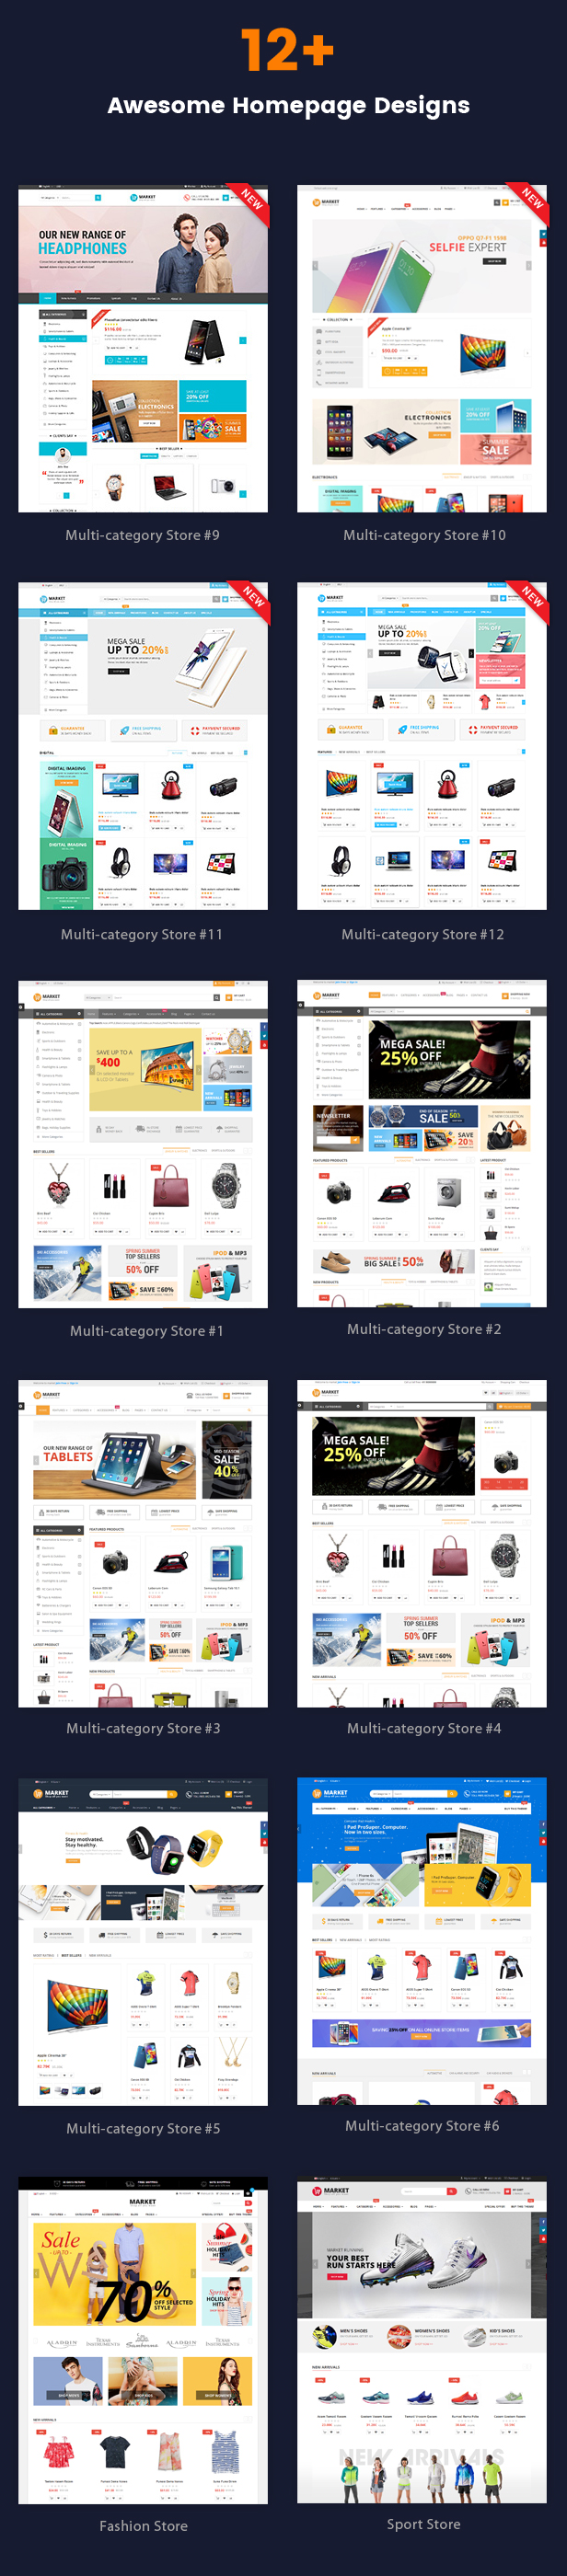 Market - Premium Responsive OpenCart Theme with Mobile-Specific Layout (12 HomePages) - 6